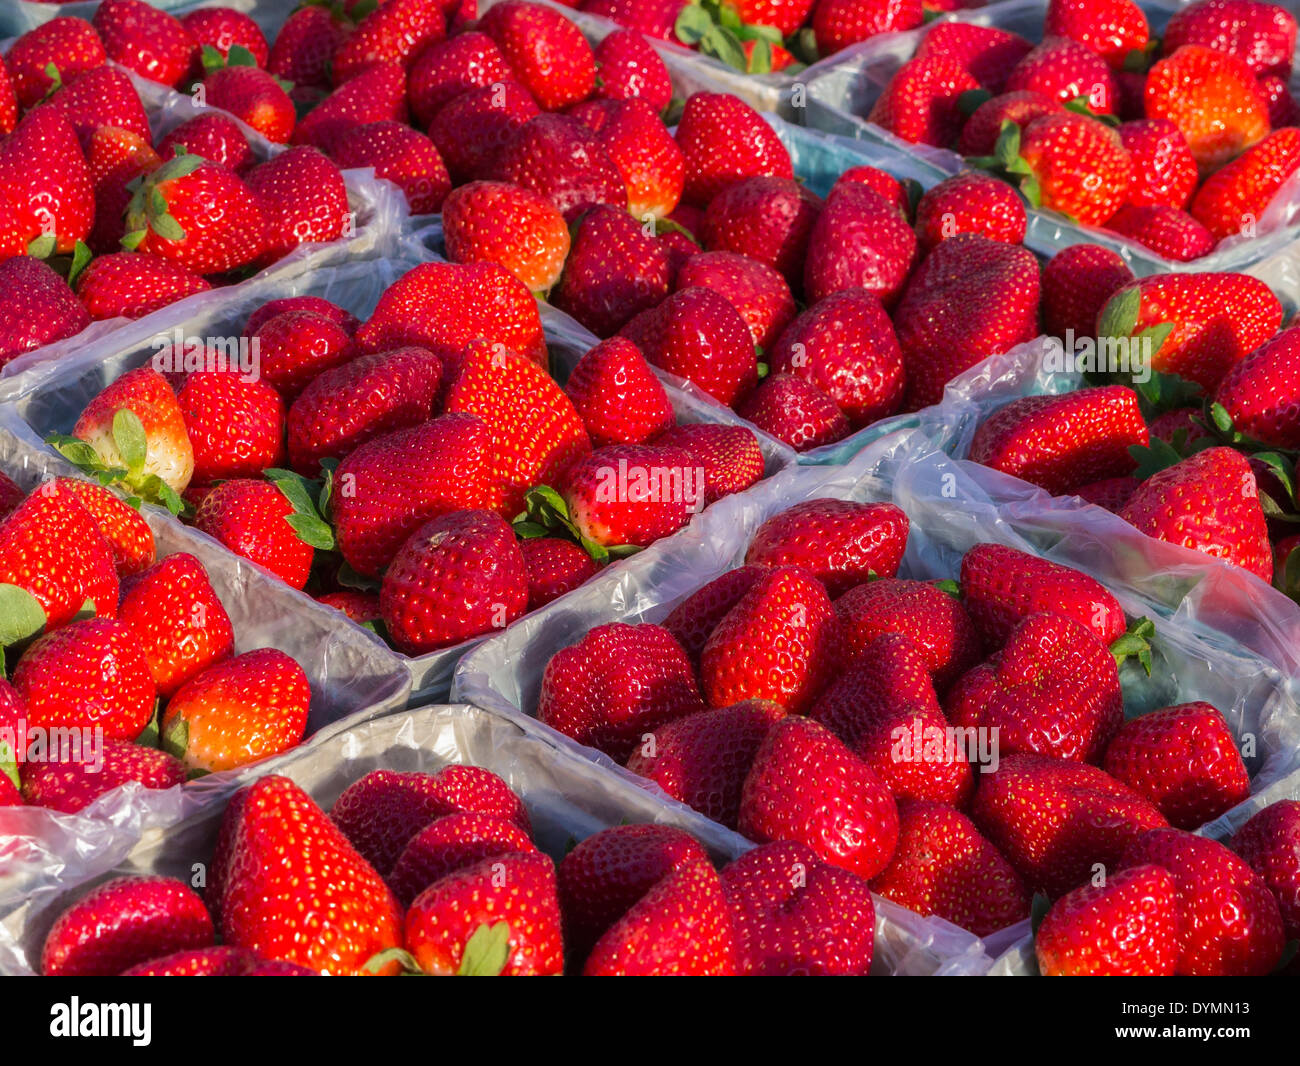 Ripe red strawberries in baskets at farmers market in Venice Florida Stock Photo